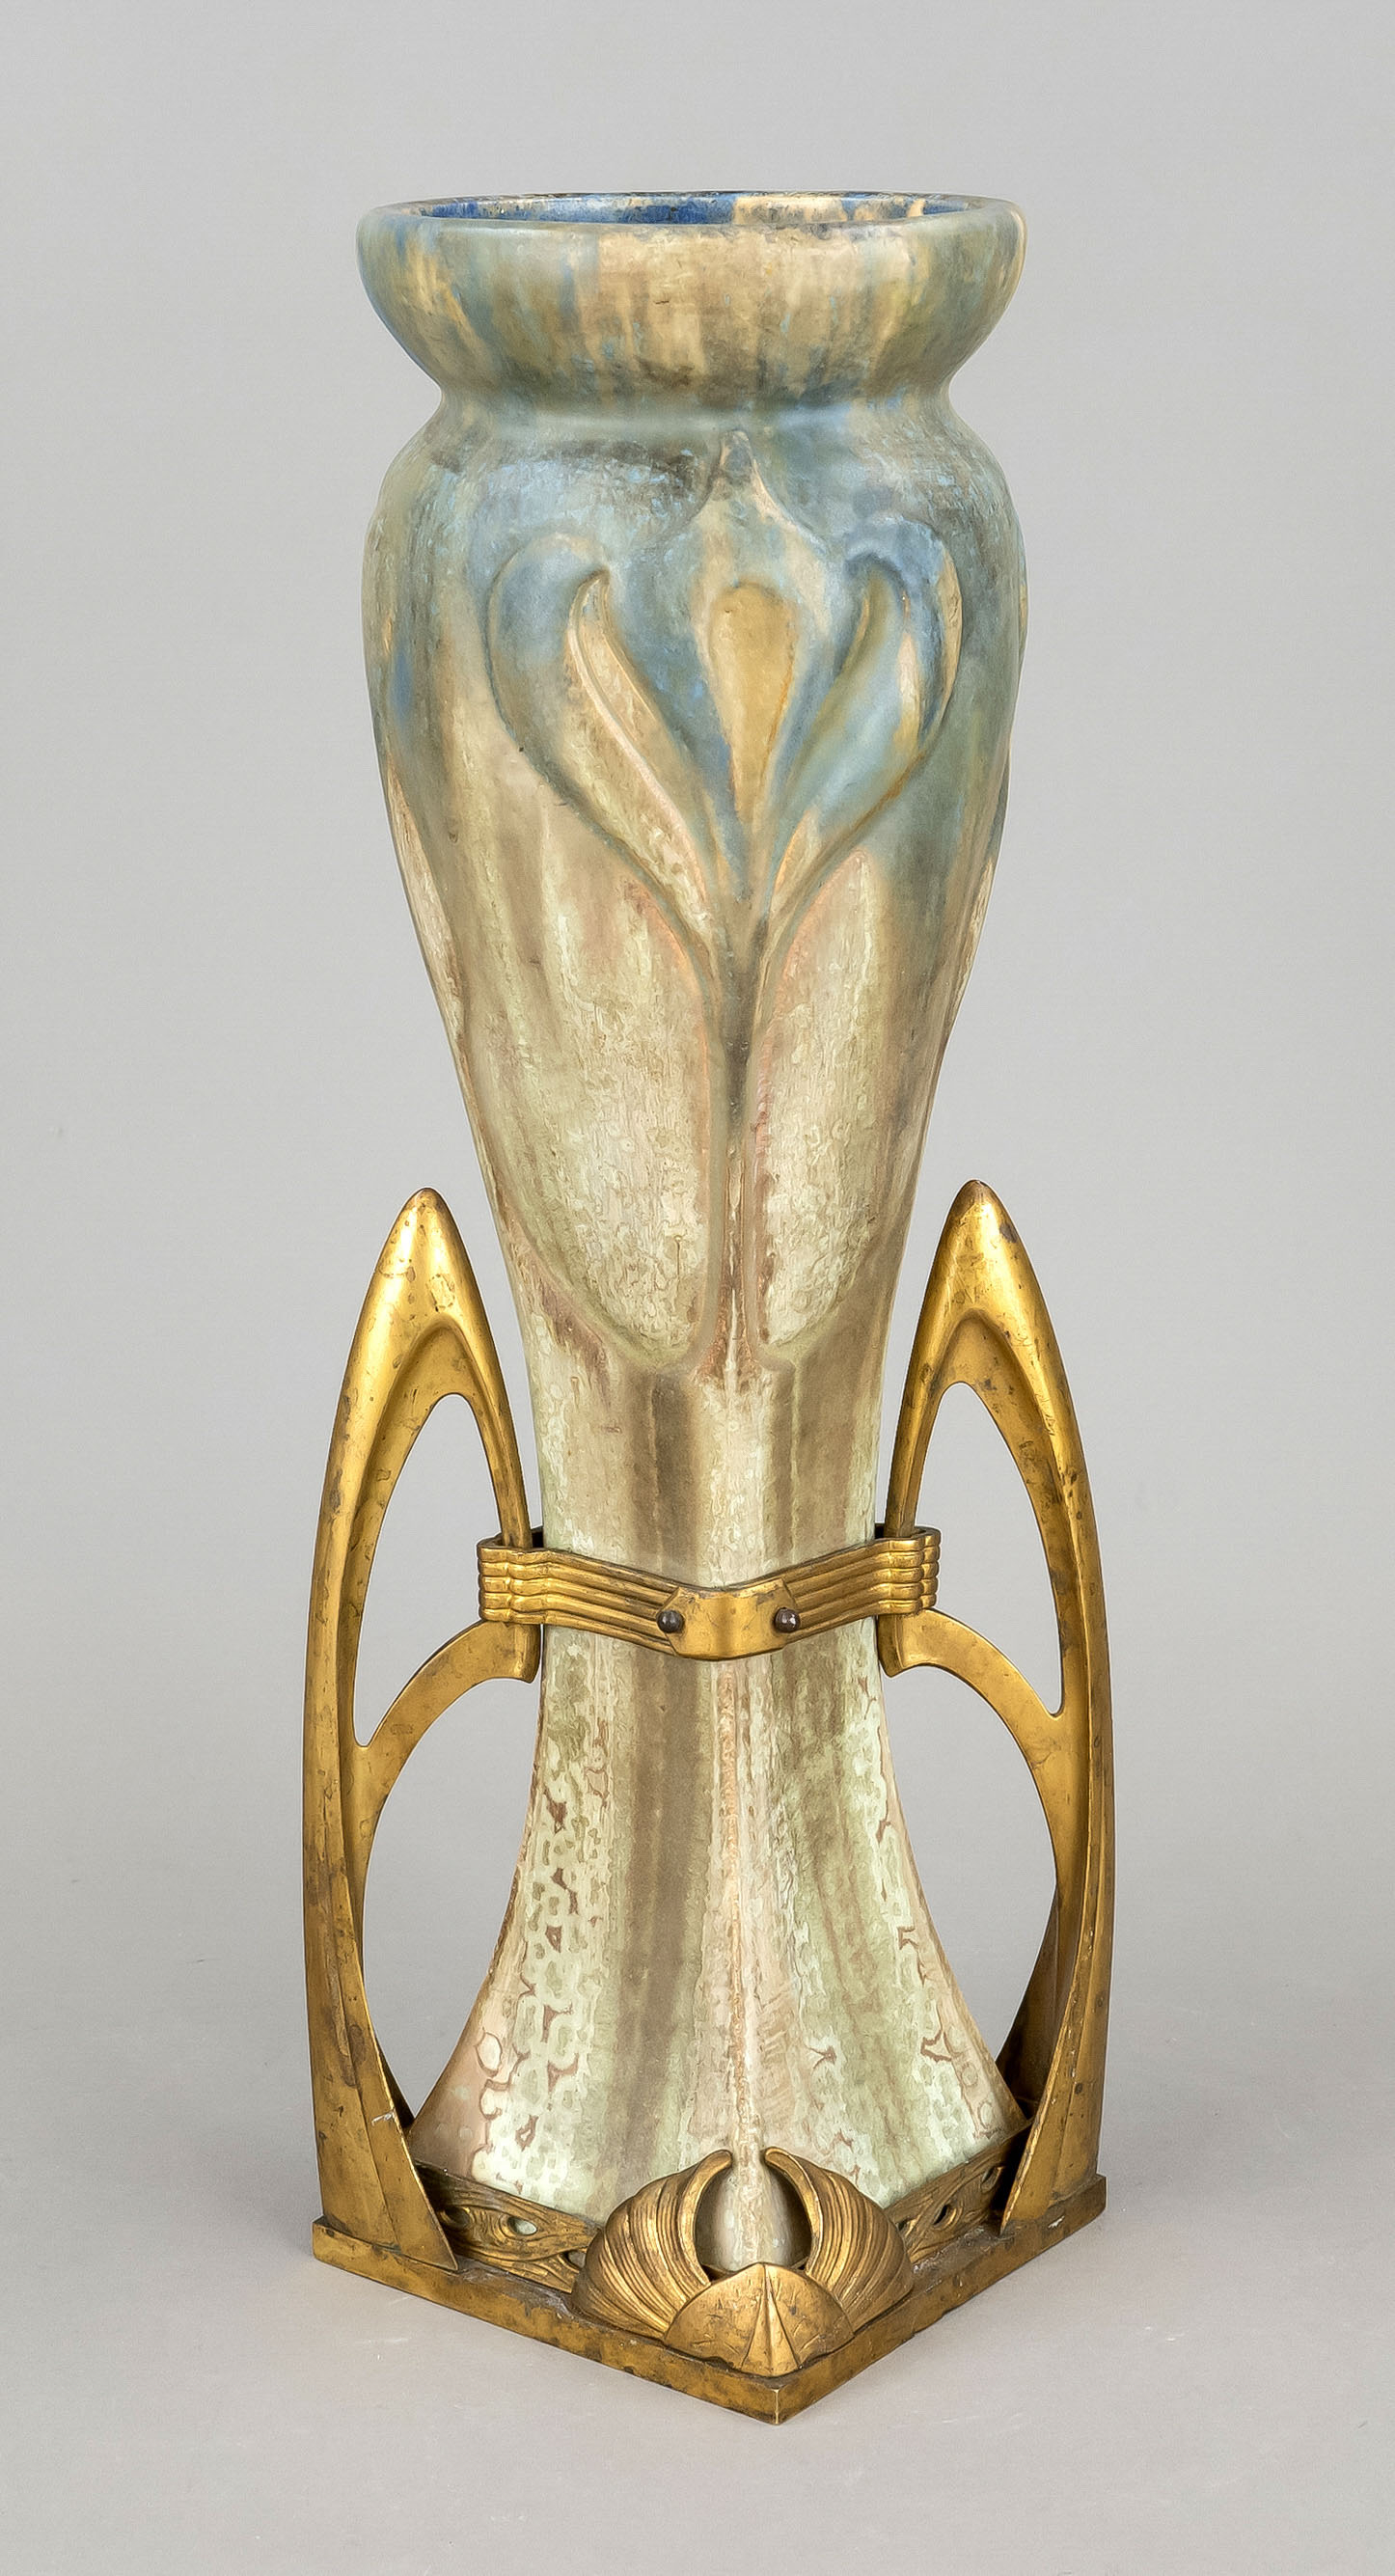 Art Nouveau vase, around 1900, stoneware, running glaze in gray-blue tones, lily blossoms in relief,